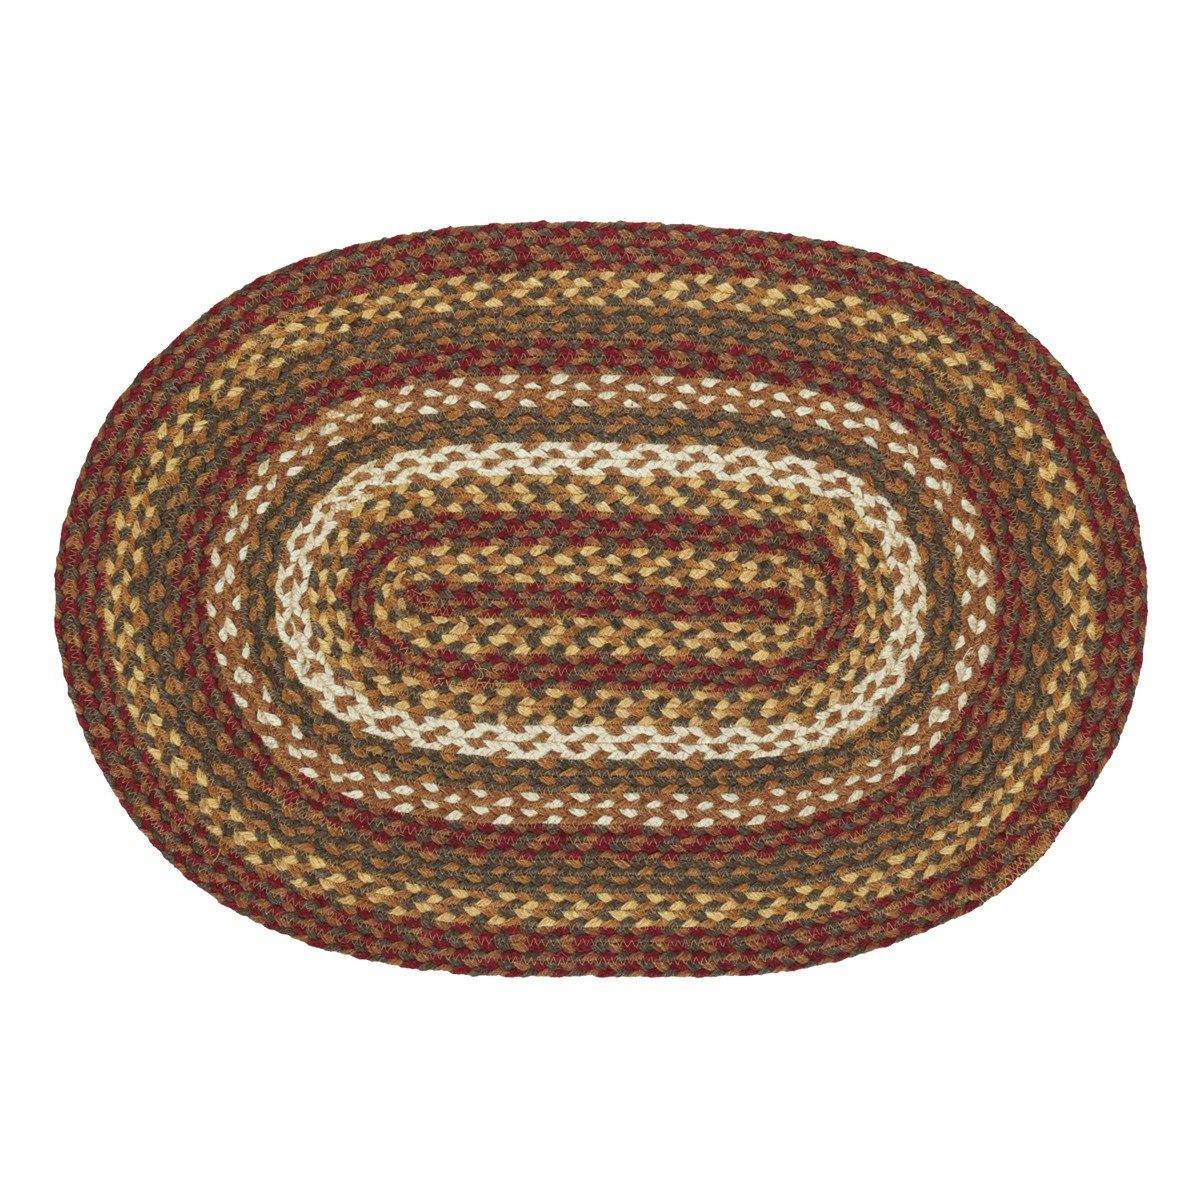 Tea Cabin Jute Braided Rug Oval 20"x30" with Rug Pad VHC Brands - The Fox Decor